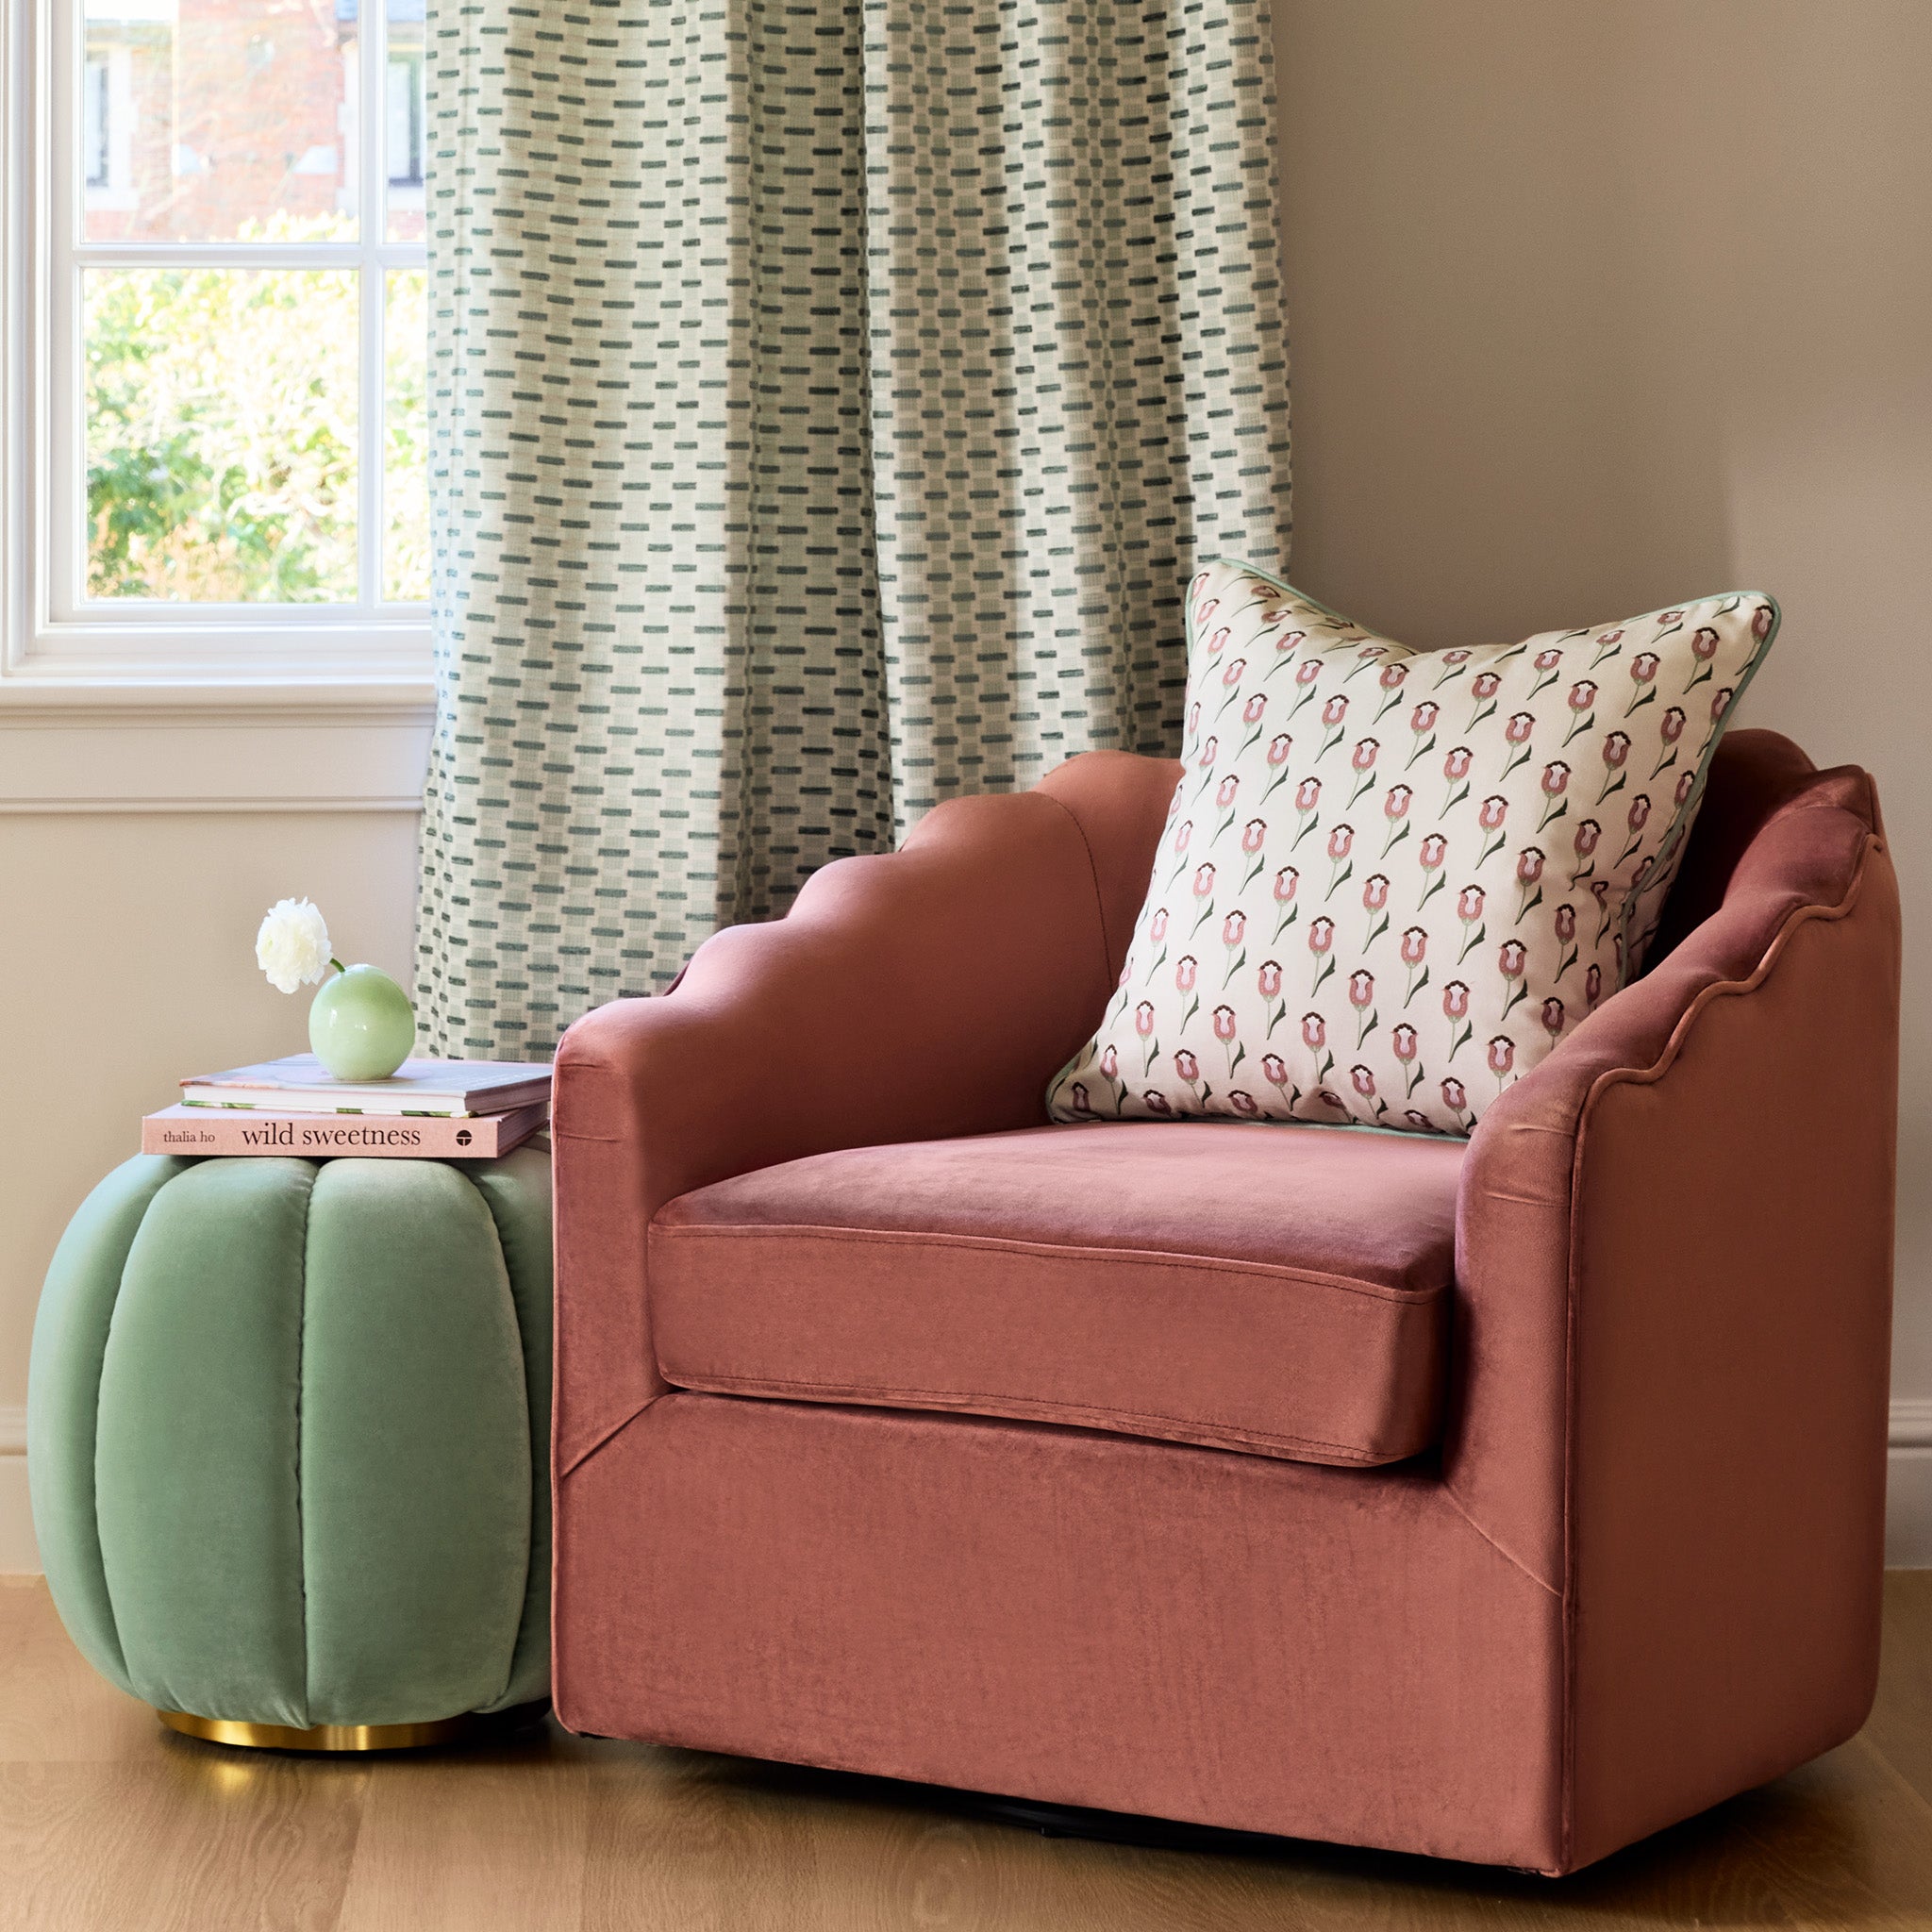 abstract floral pink and green pillow on a rust colored chair with chenille curtains